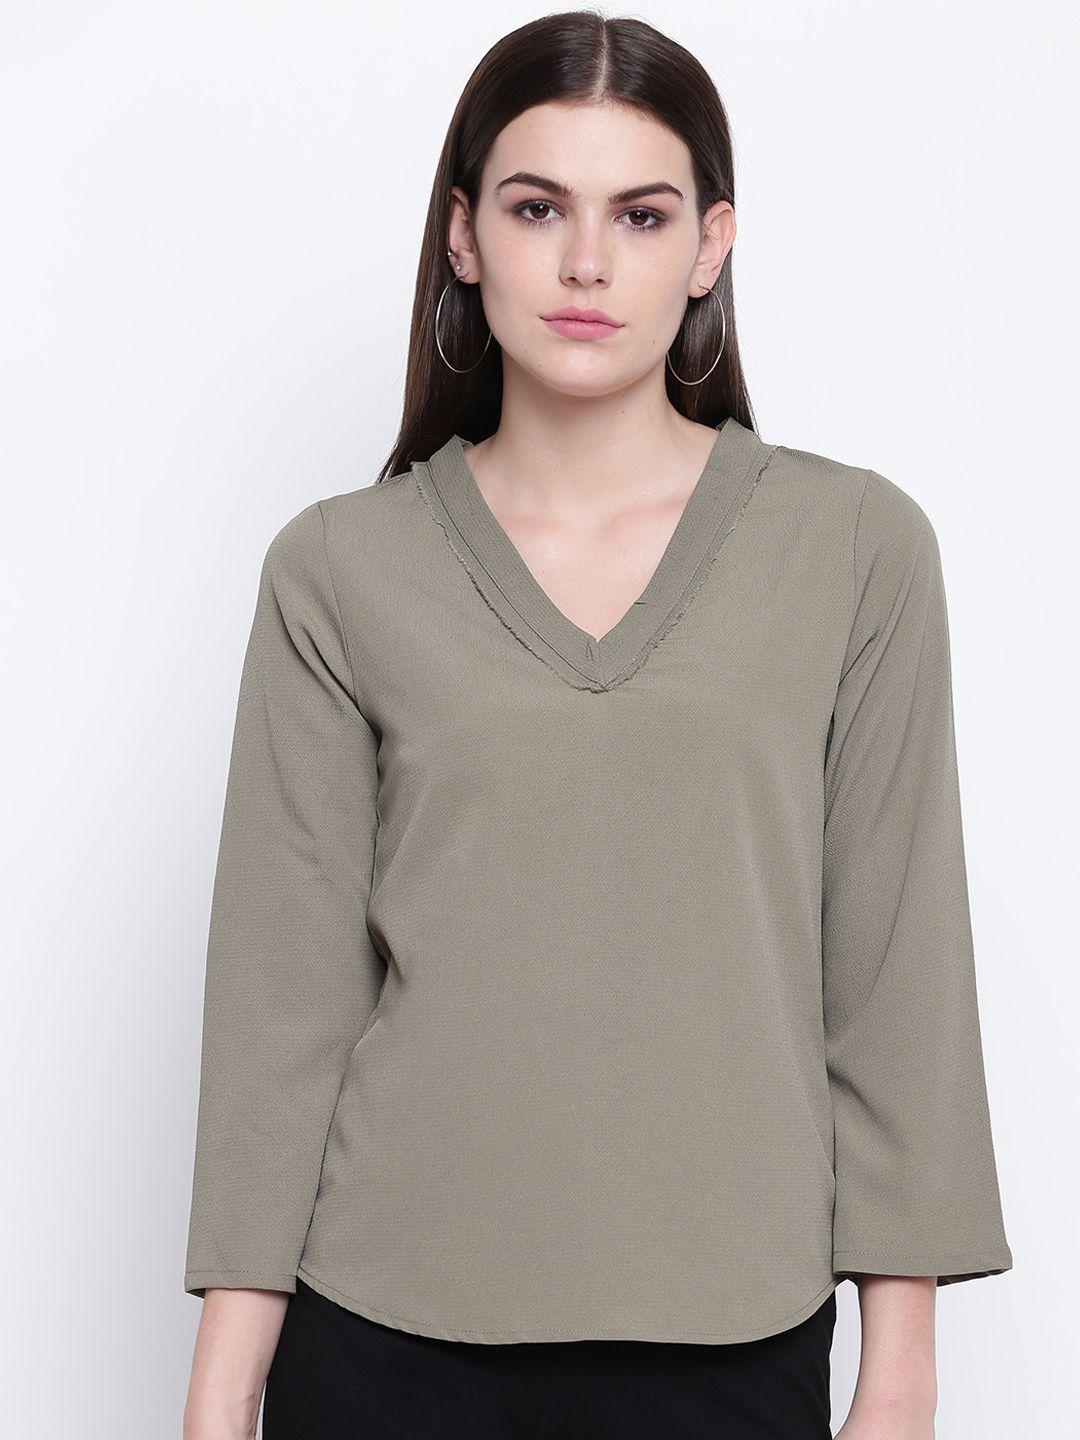 dodo & moa women olive green solid top